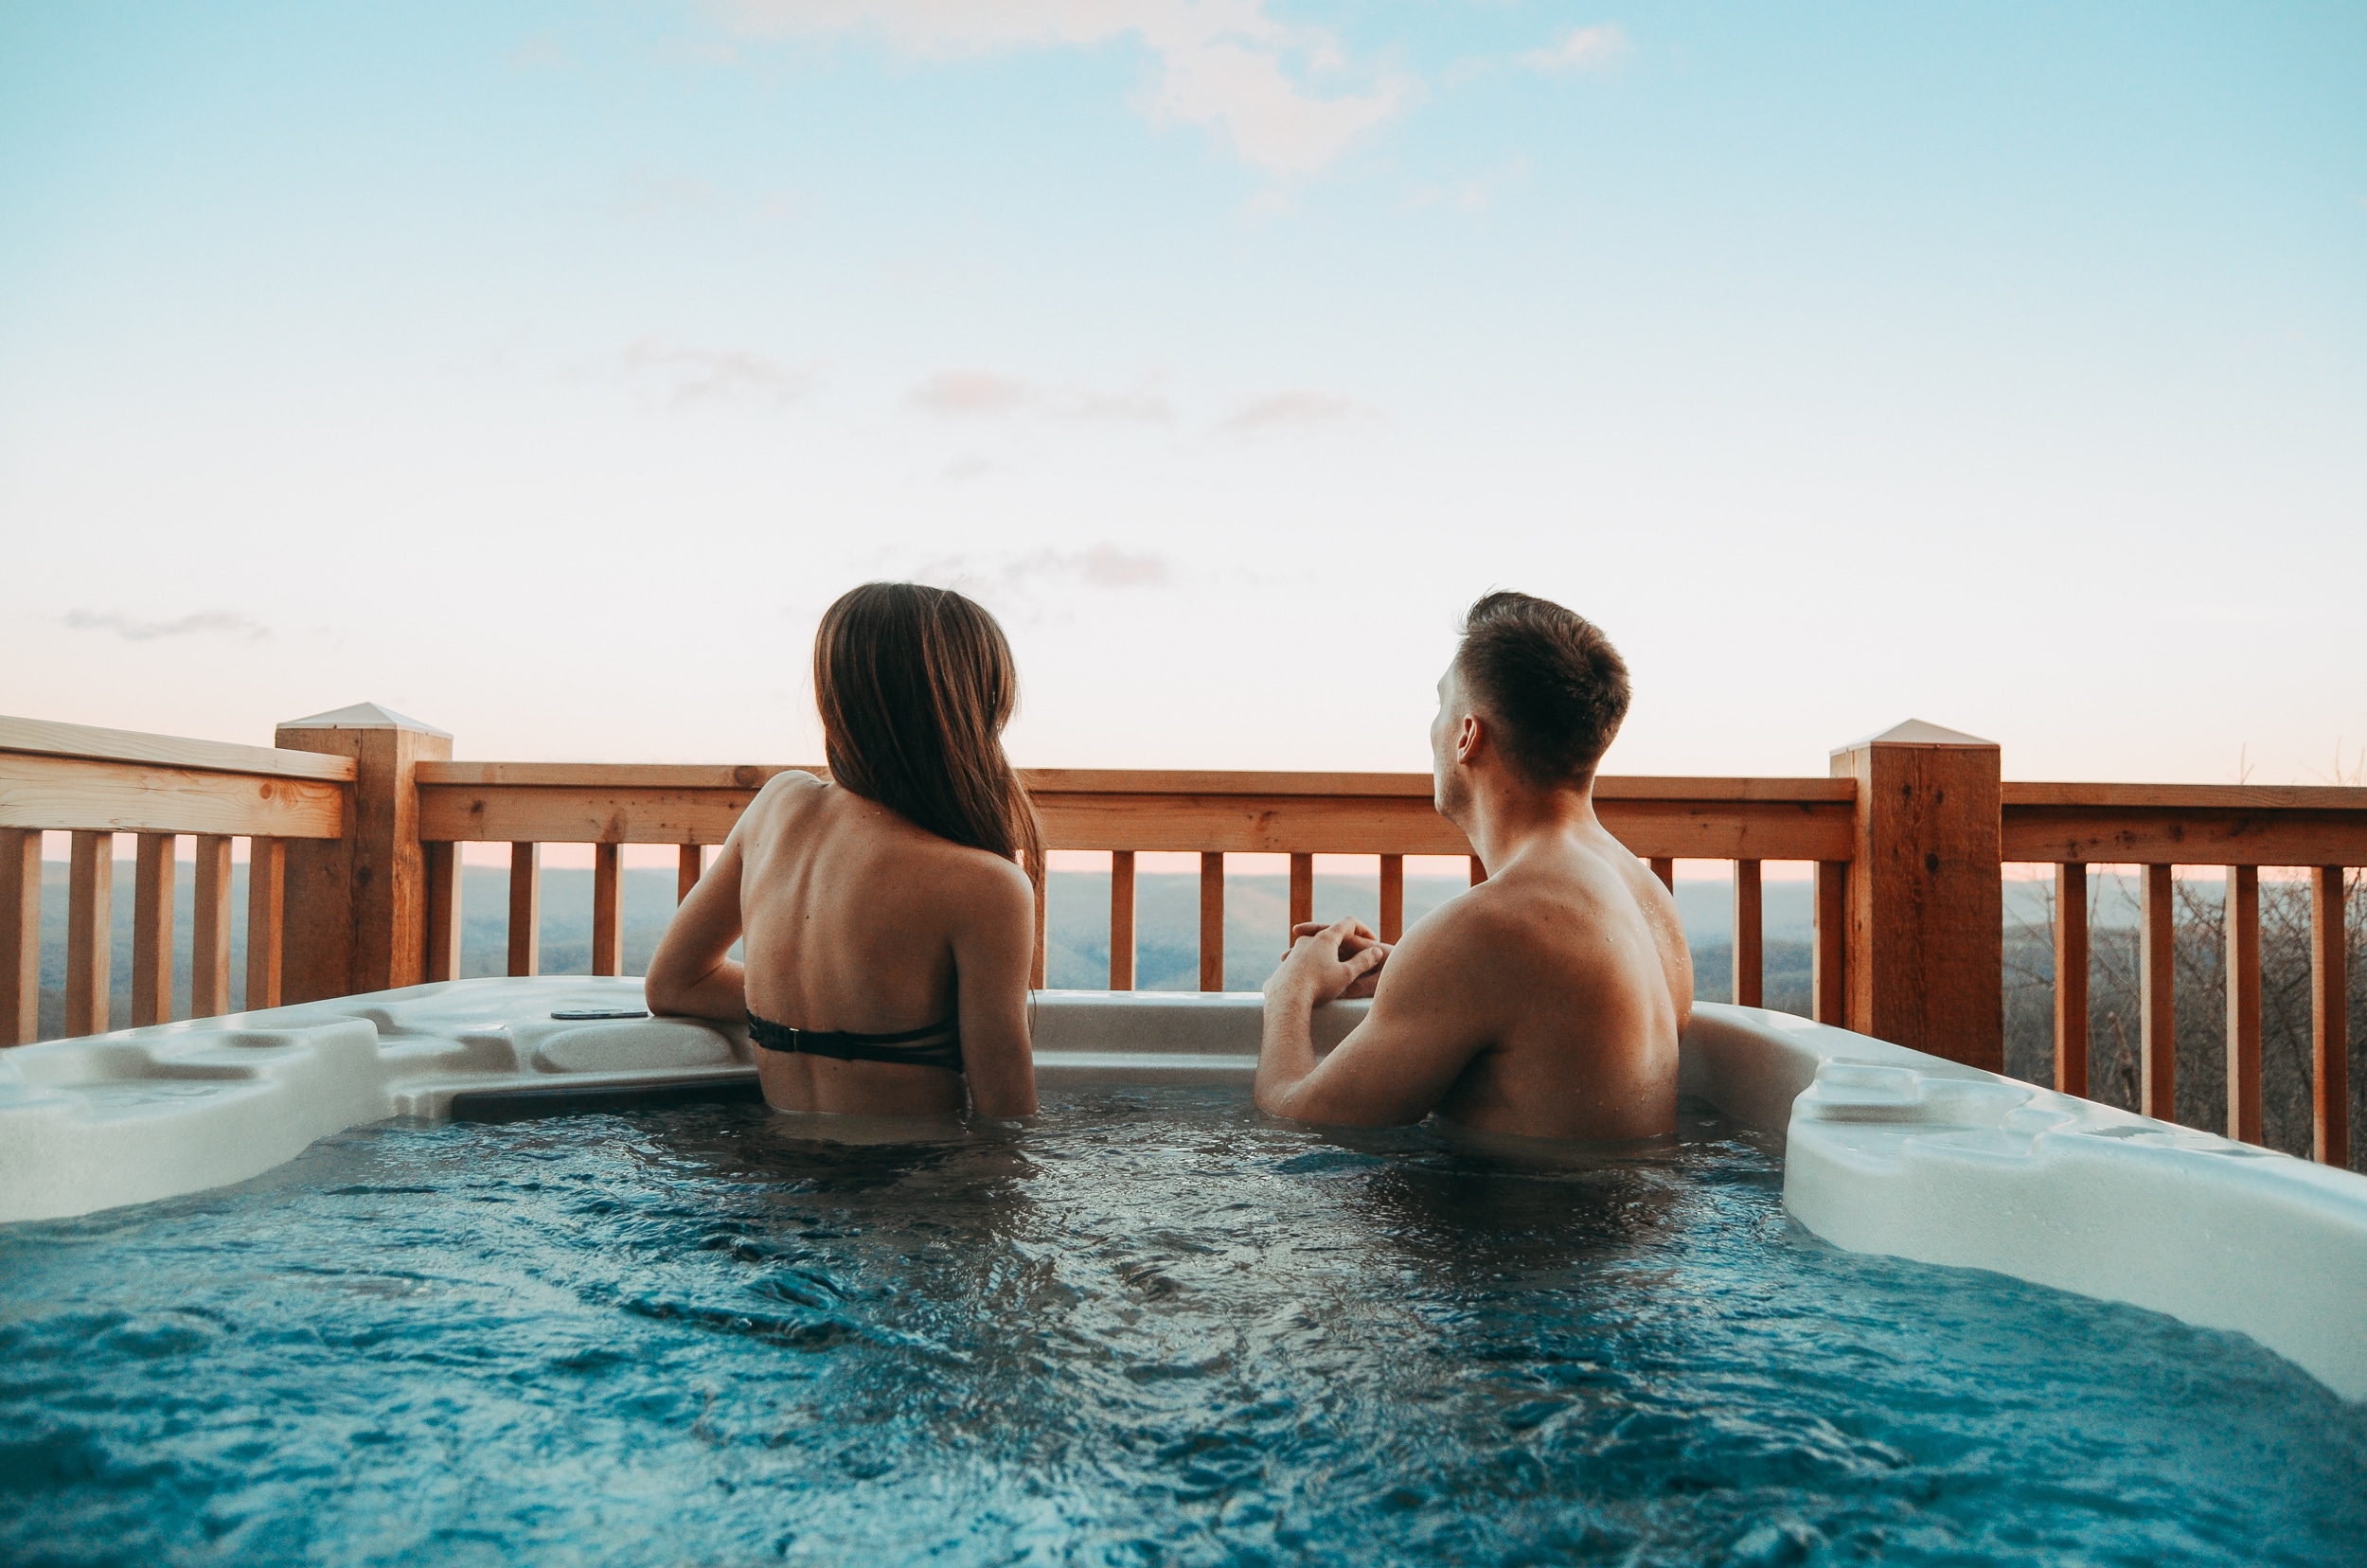 A couple in a hot tub located on a cabin deck overlooking Ozark mountains